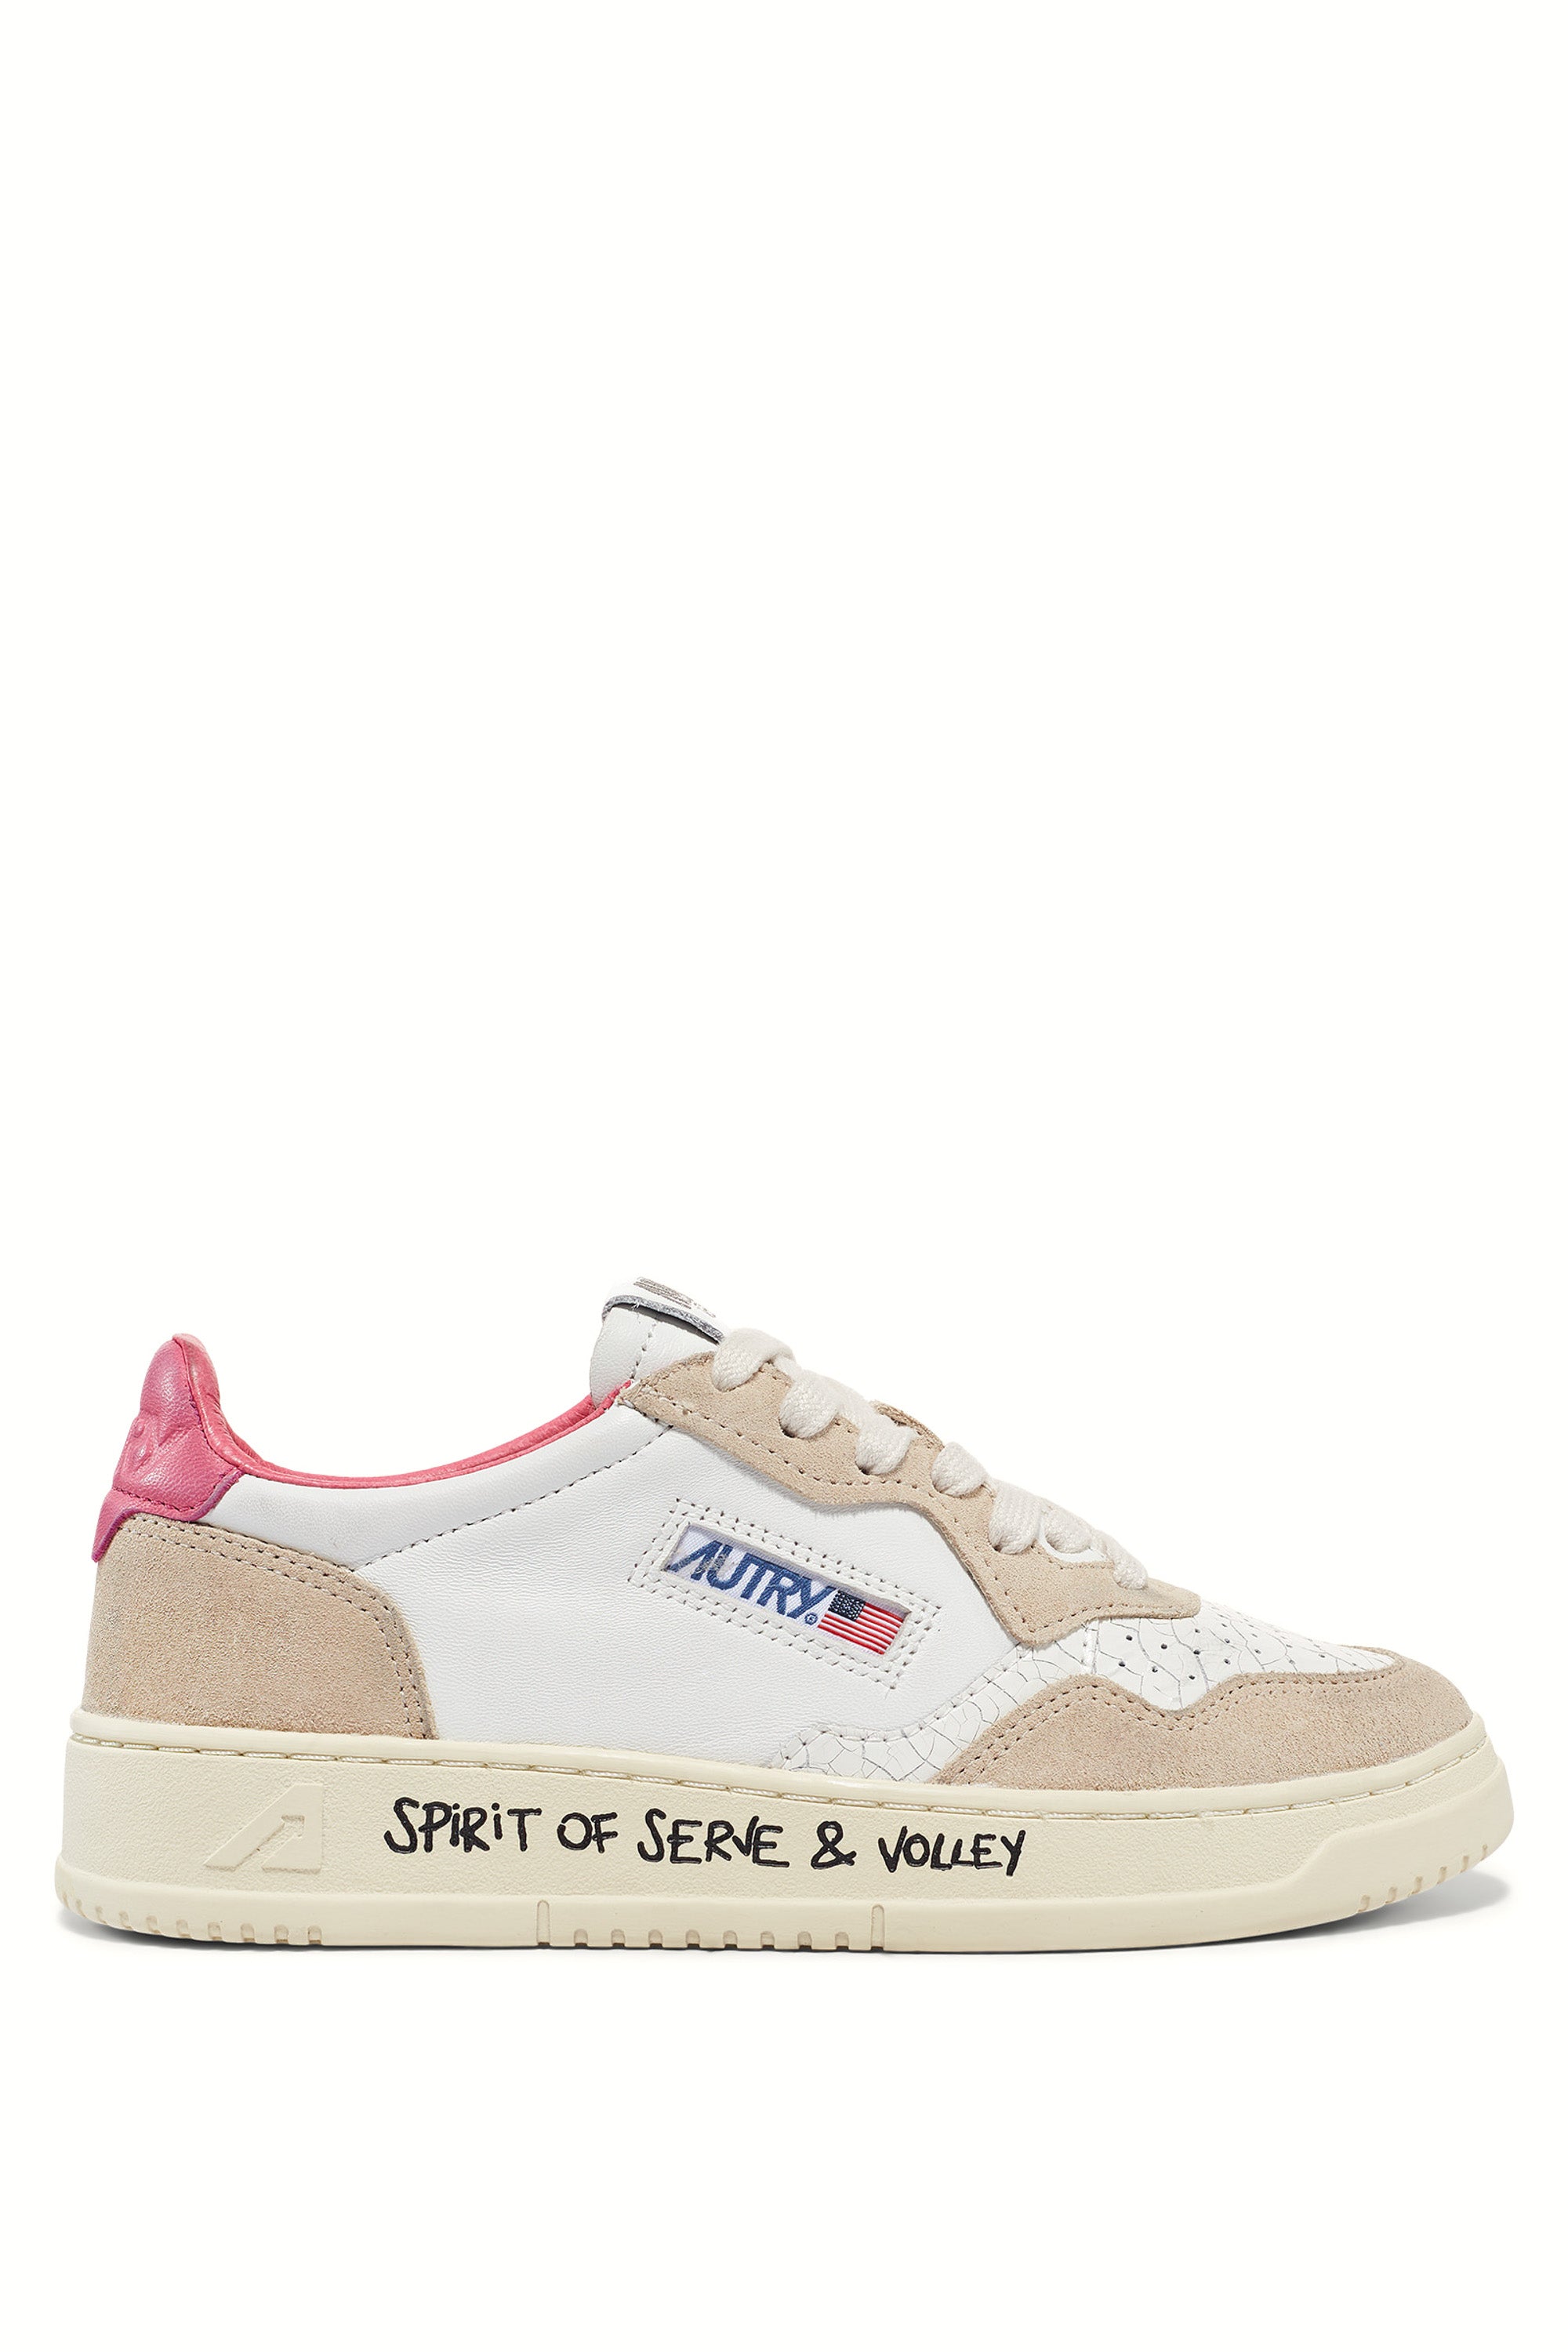 Medalist women's sneaker with fuchsia heel tab and writing